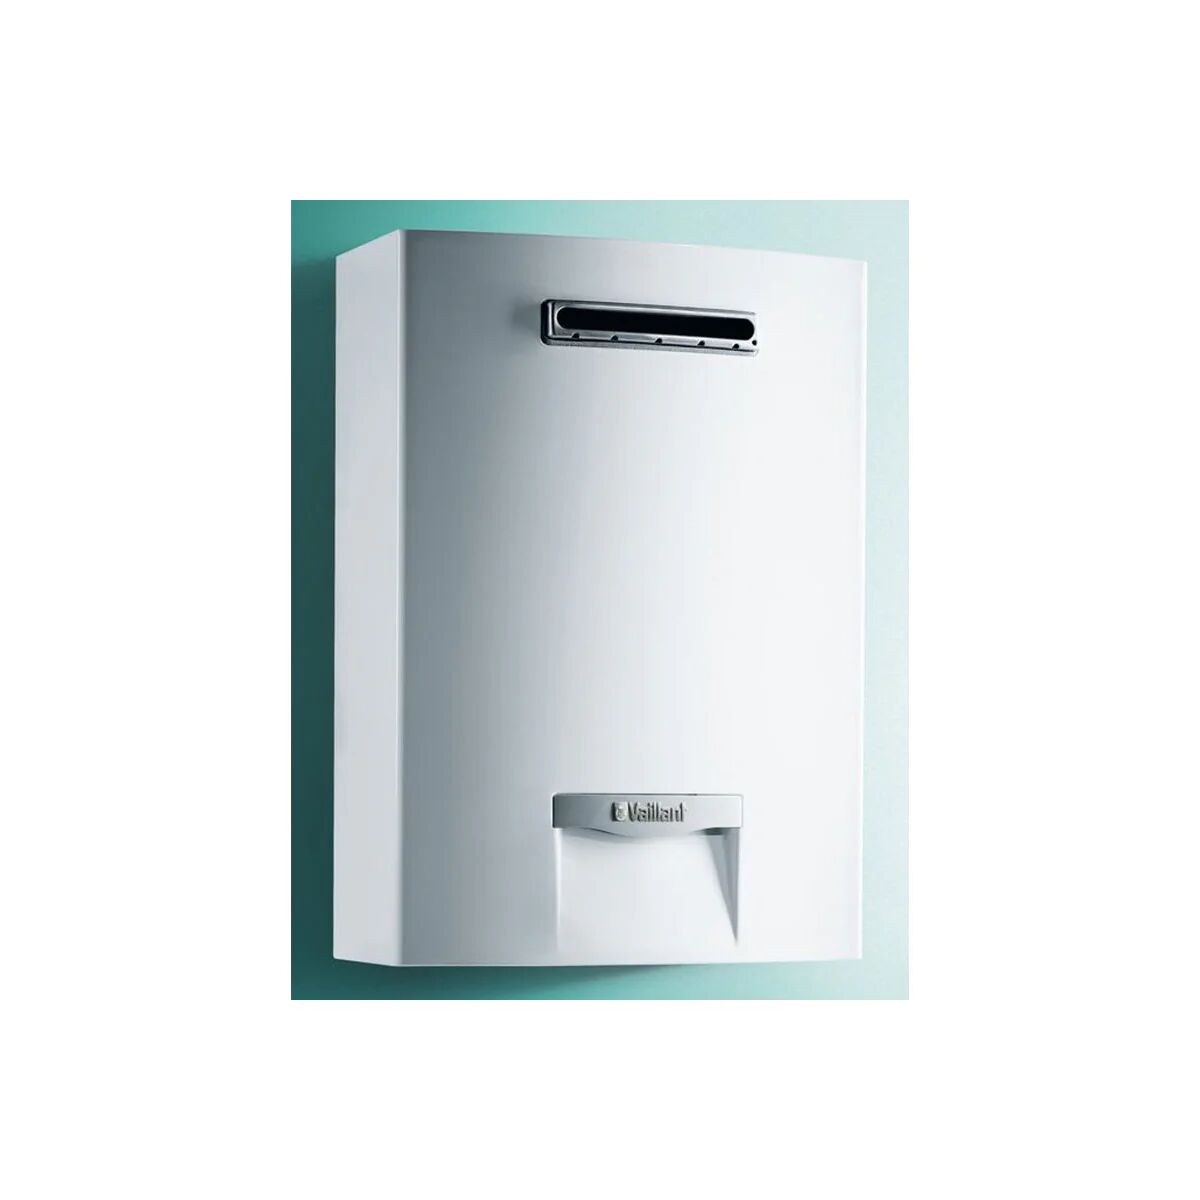 Scaldabagno Vaillant Outsidemag 158/1-5 Camera Stagna 15 Lt Low Nox Gpl A (10022468)